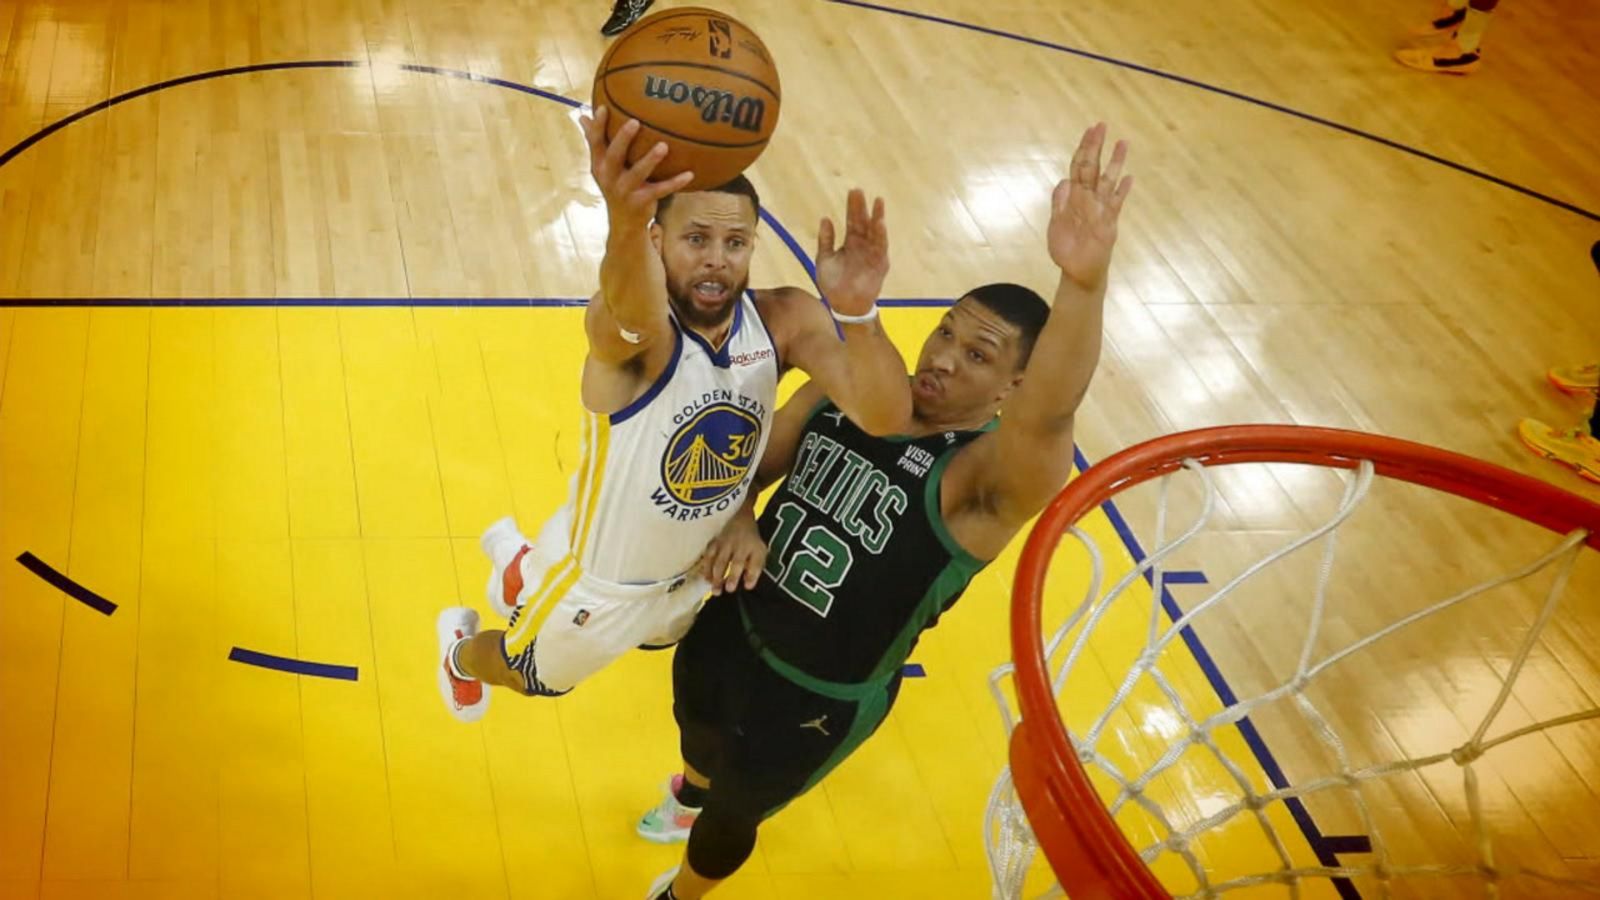 Boston Celtics lose to Golden State Warriors 104-94 in Game 5 of